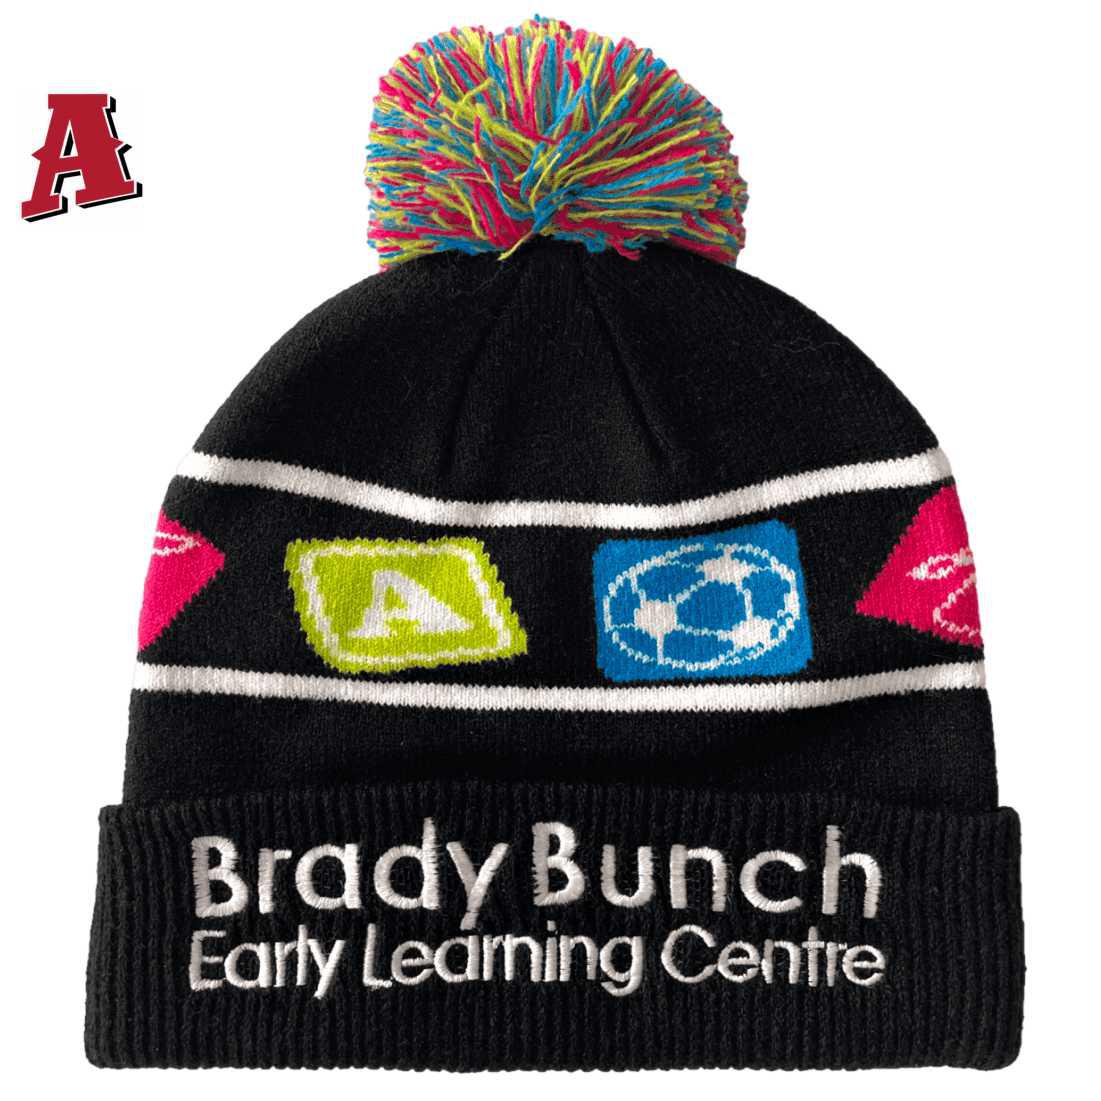 Brady Bunch Early Learning Centre Burpengary Qld Aussie Acrylic Beanie Childs with Pom Pom Black White